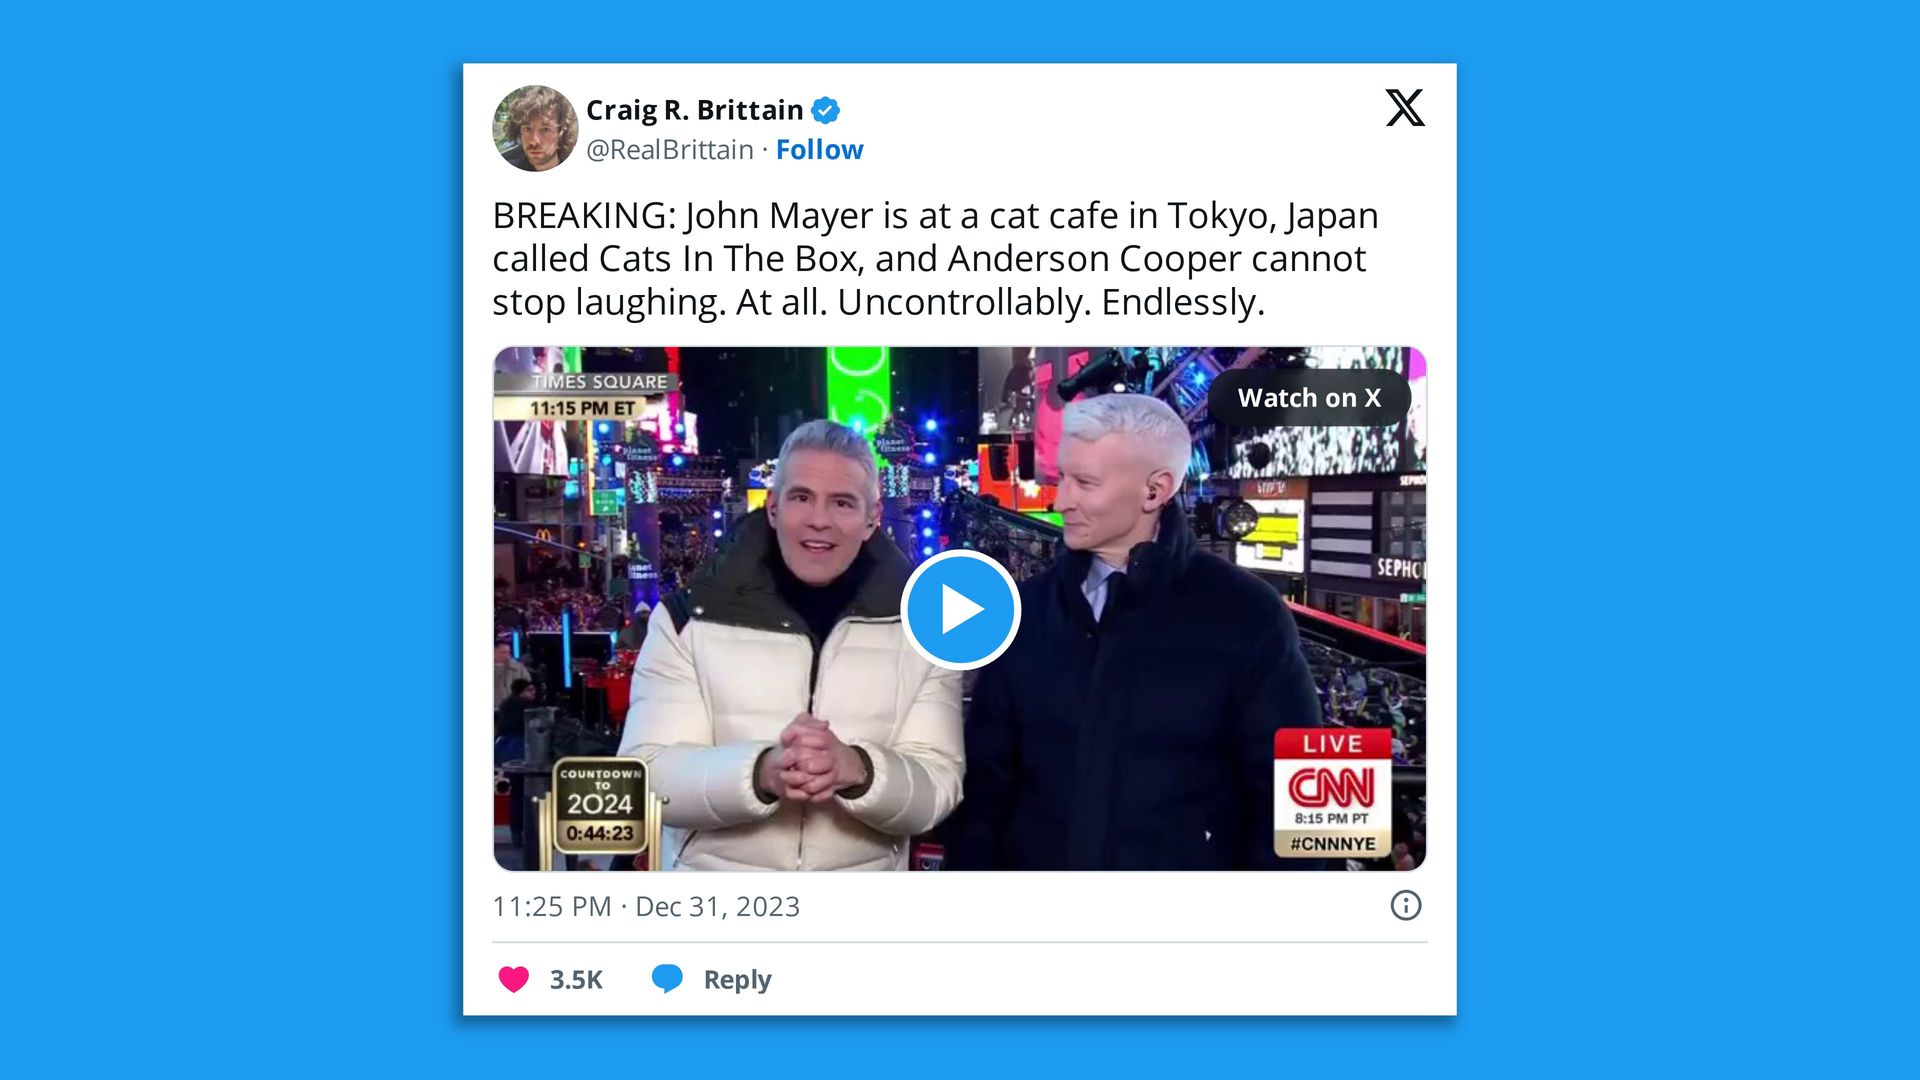 Screenshot of a tweet describing John Mayer at a cat cafe in Tokyo while Anderson Cooper laughs nonstop.